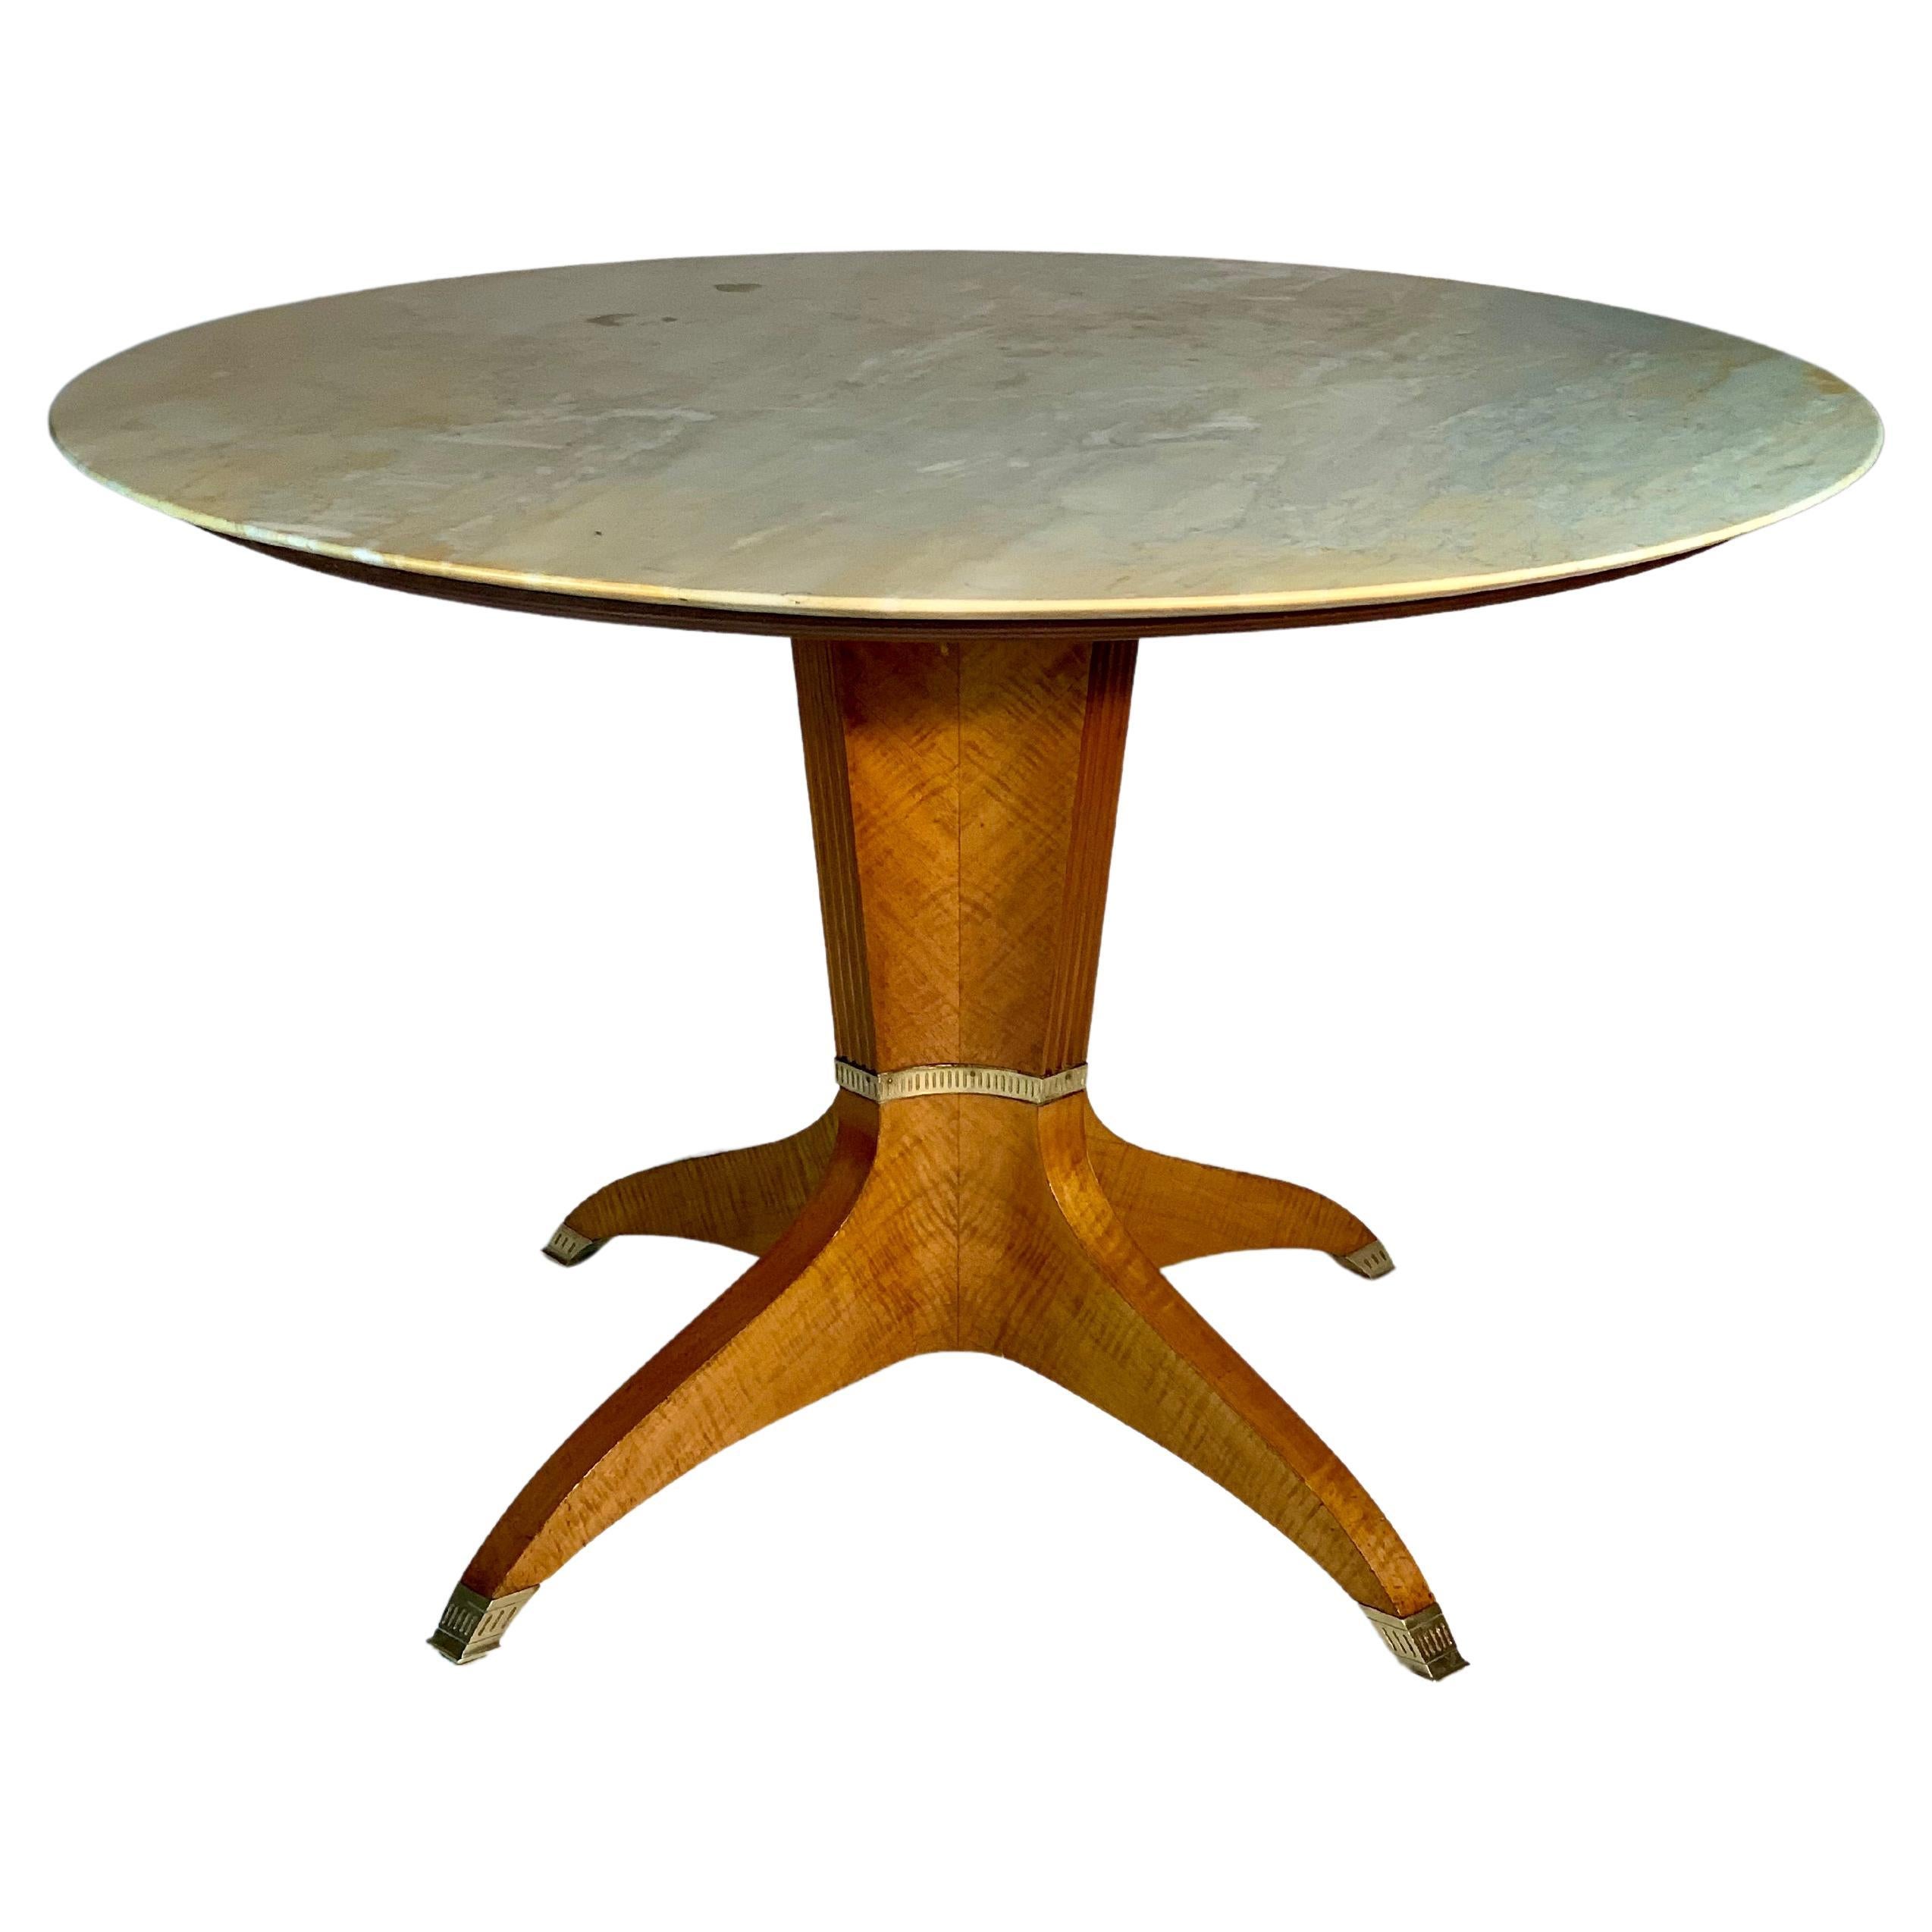 Mid-Century Italian Round Table Marble Top Brass Feet and Details